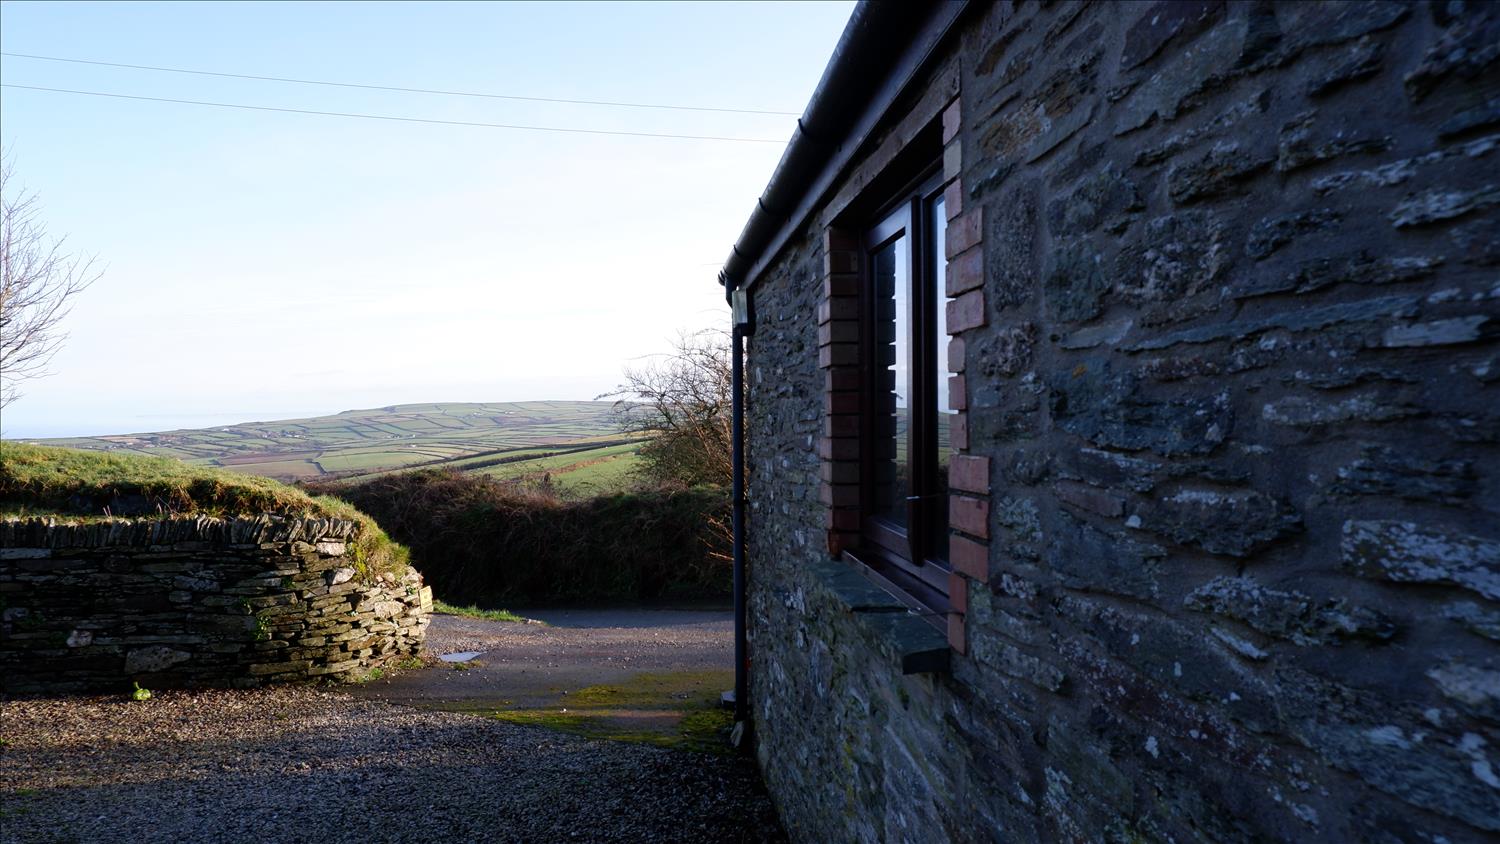 The stone wall of Polrunny Farm's Elderberry Cottage in the foreground, with stunning rural views beyond, as the hills roll down to the sea